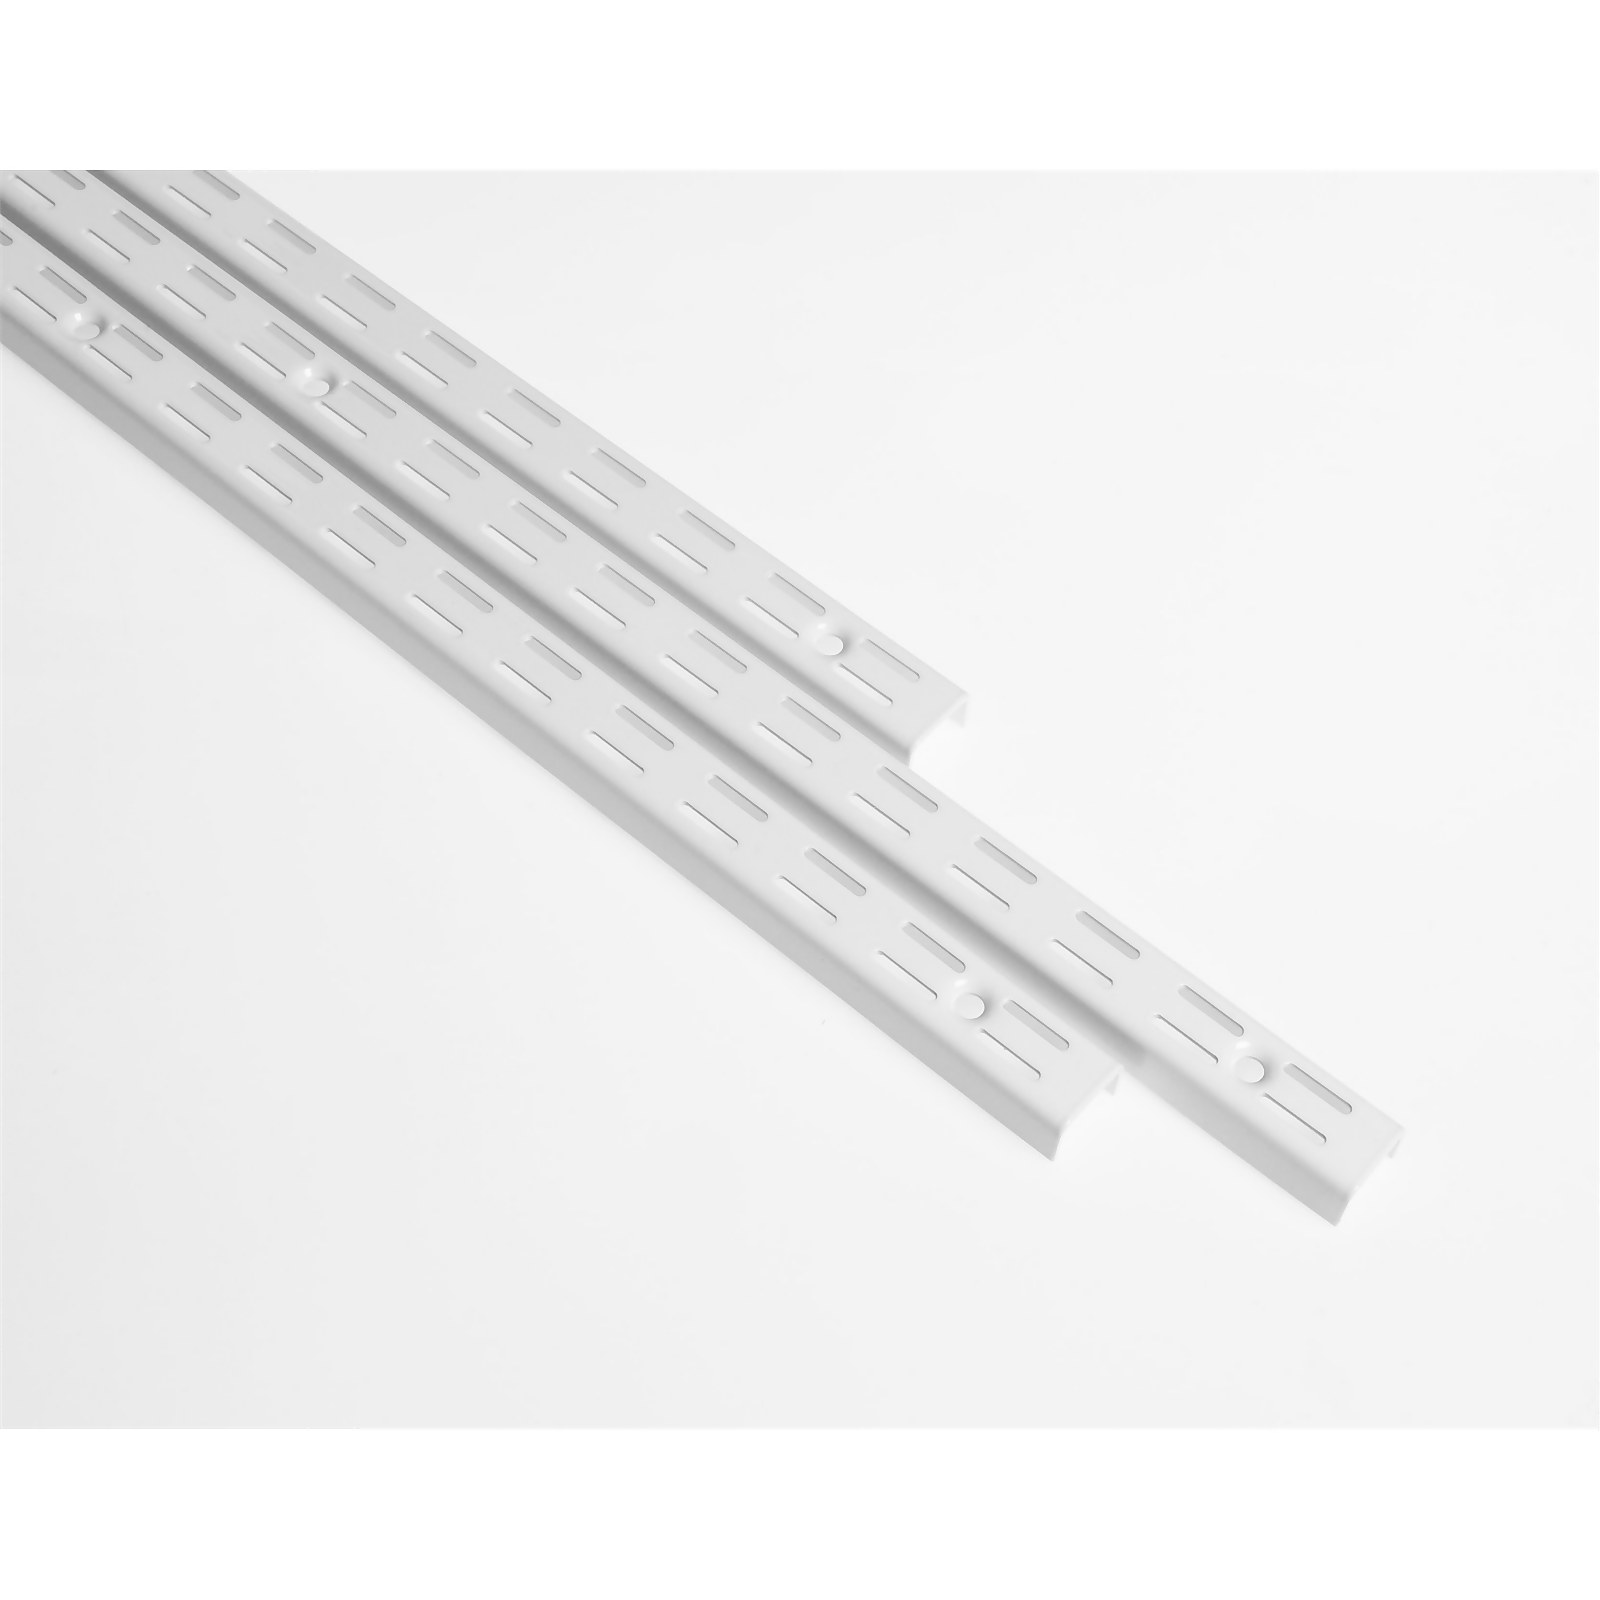 Photo of Anti-bacterial Twin Slot Shelving Kit - 1600mm White Twinslot And 120mm Brackets - White